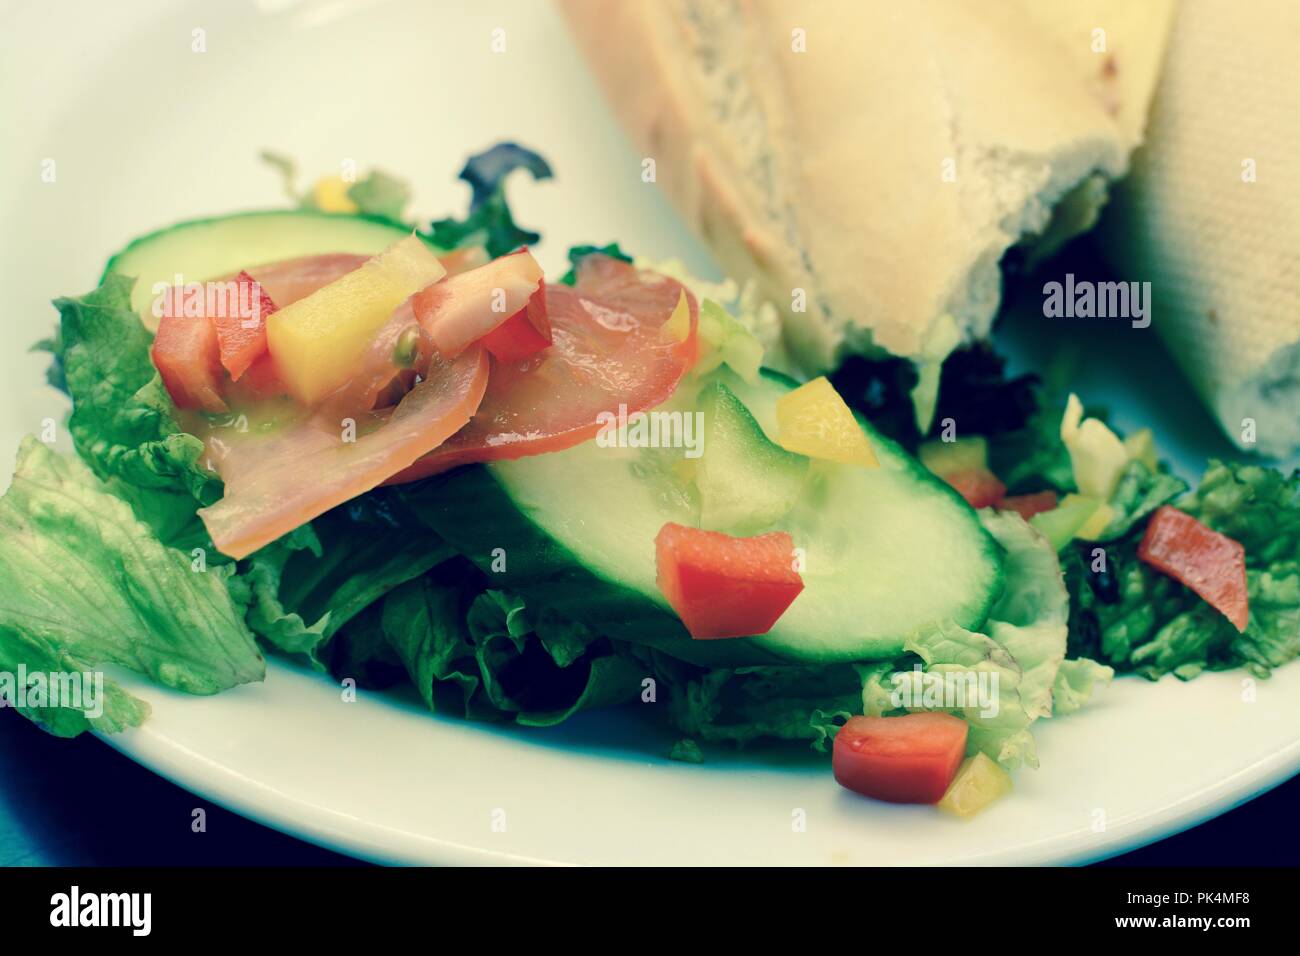 White baguette cheddar cheese and chutney sandwich with side salad, filter applied Stock Photo